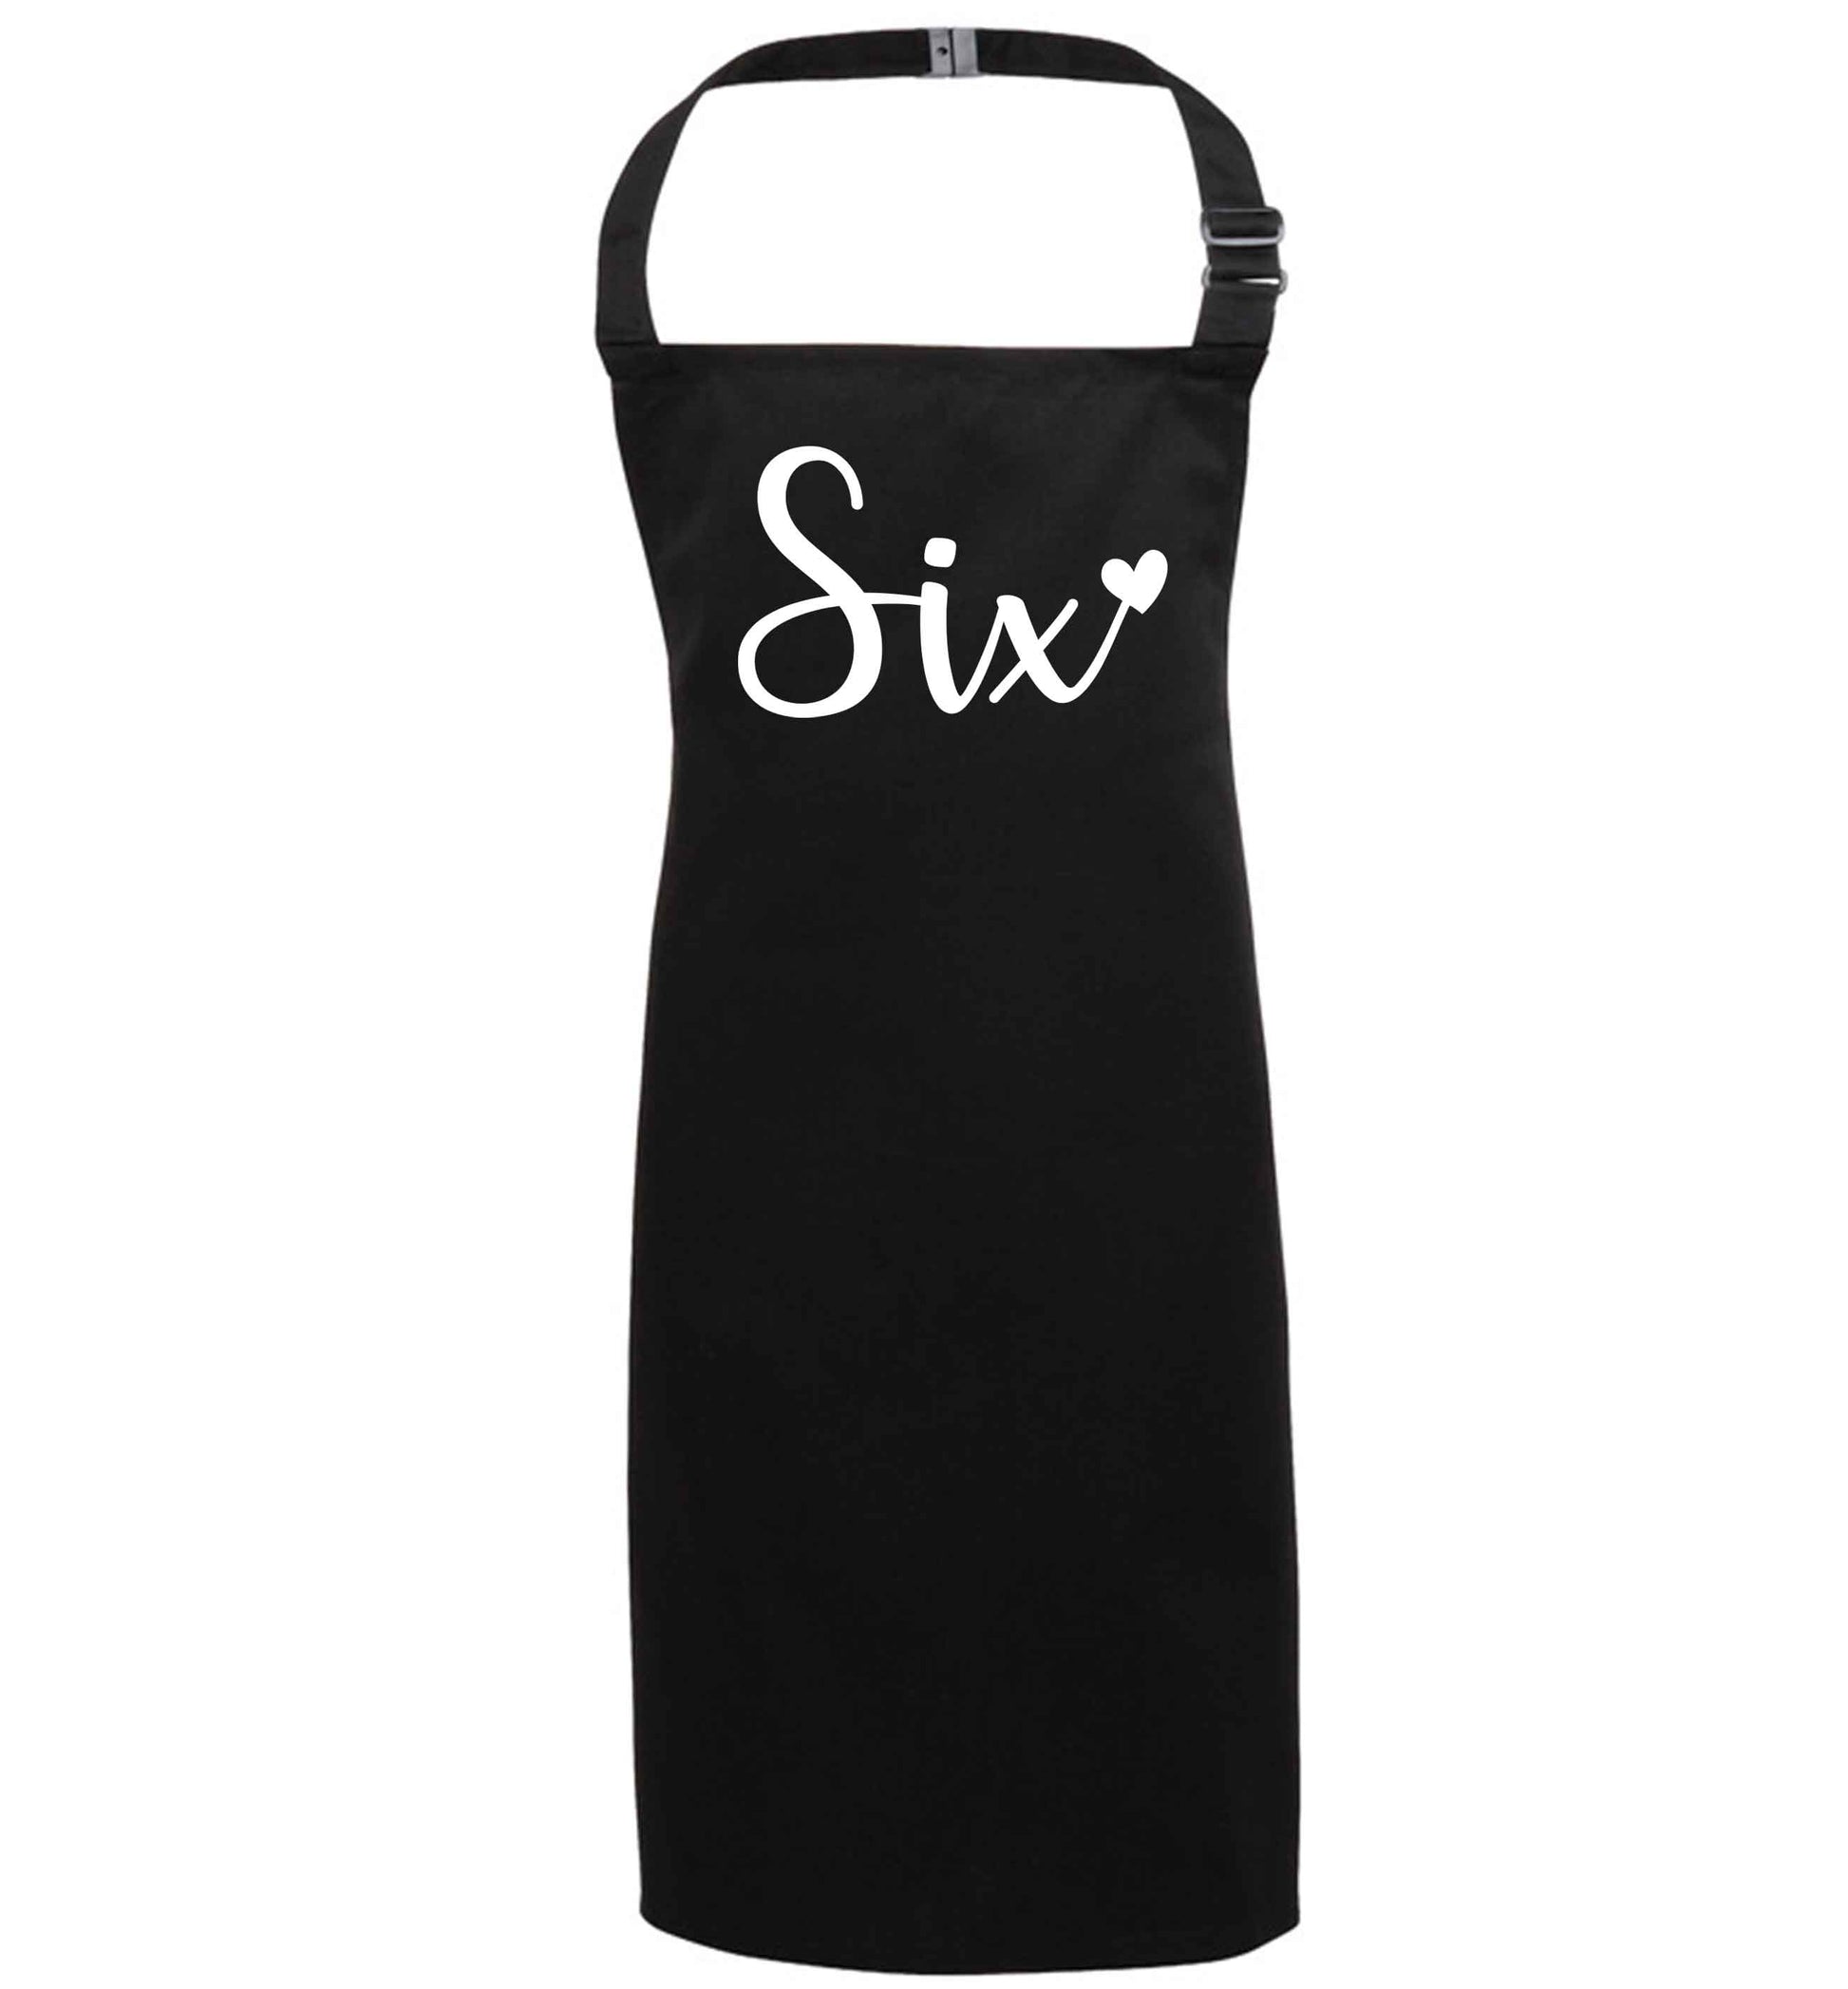 Six and heart! black apron 7-10 years